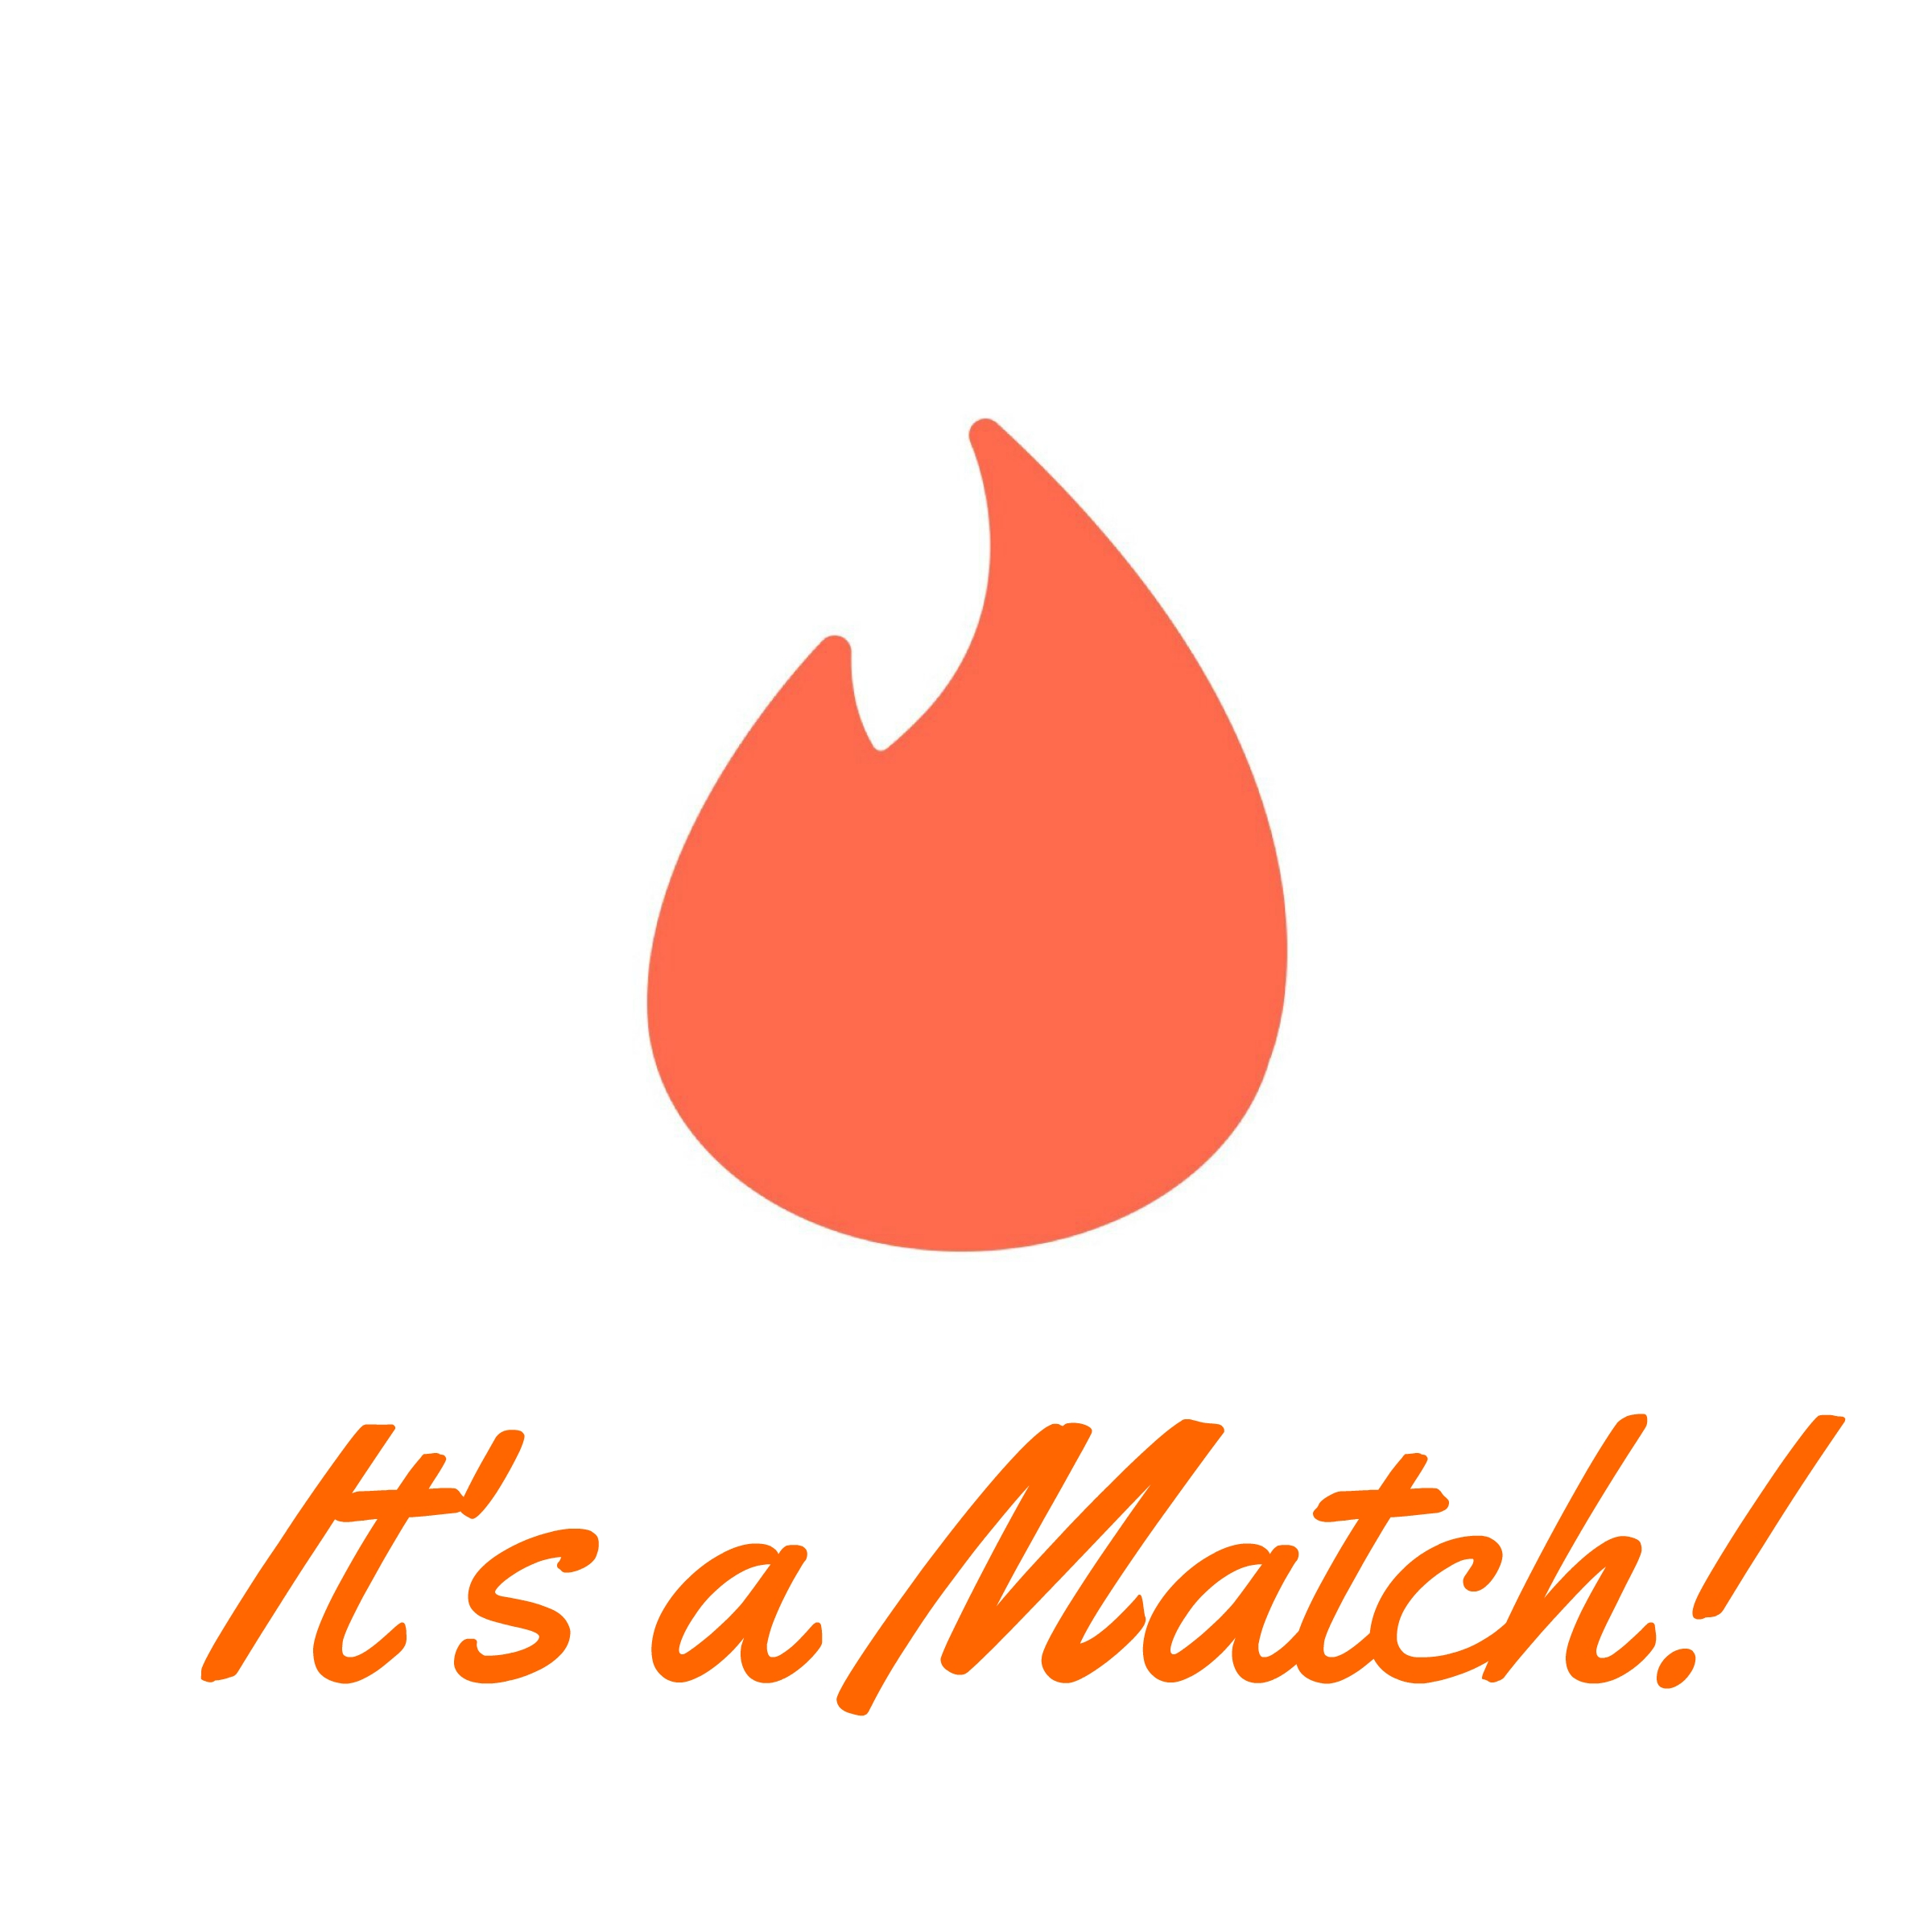 Tinder Tips | No Matches On Tinder? Learn How To Tinder From The Pros!